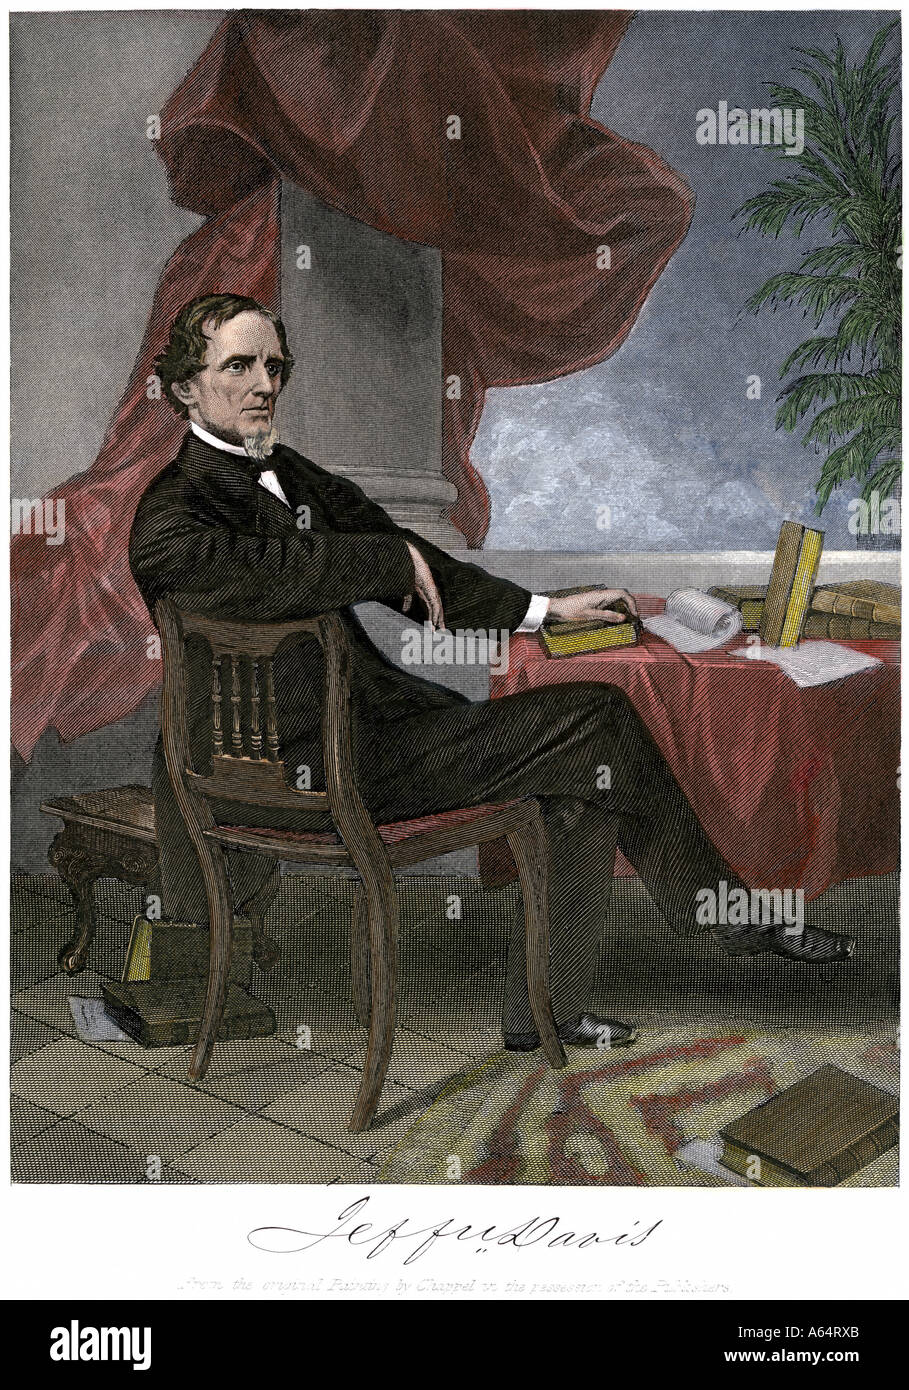 Jefferson Davis President of the Confederate States of America at his desk. Hand-colored steel engraving Stock Photo